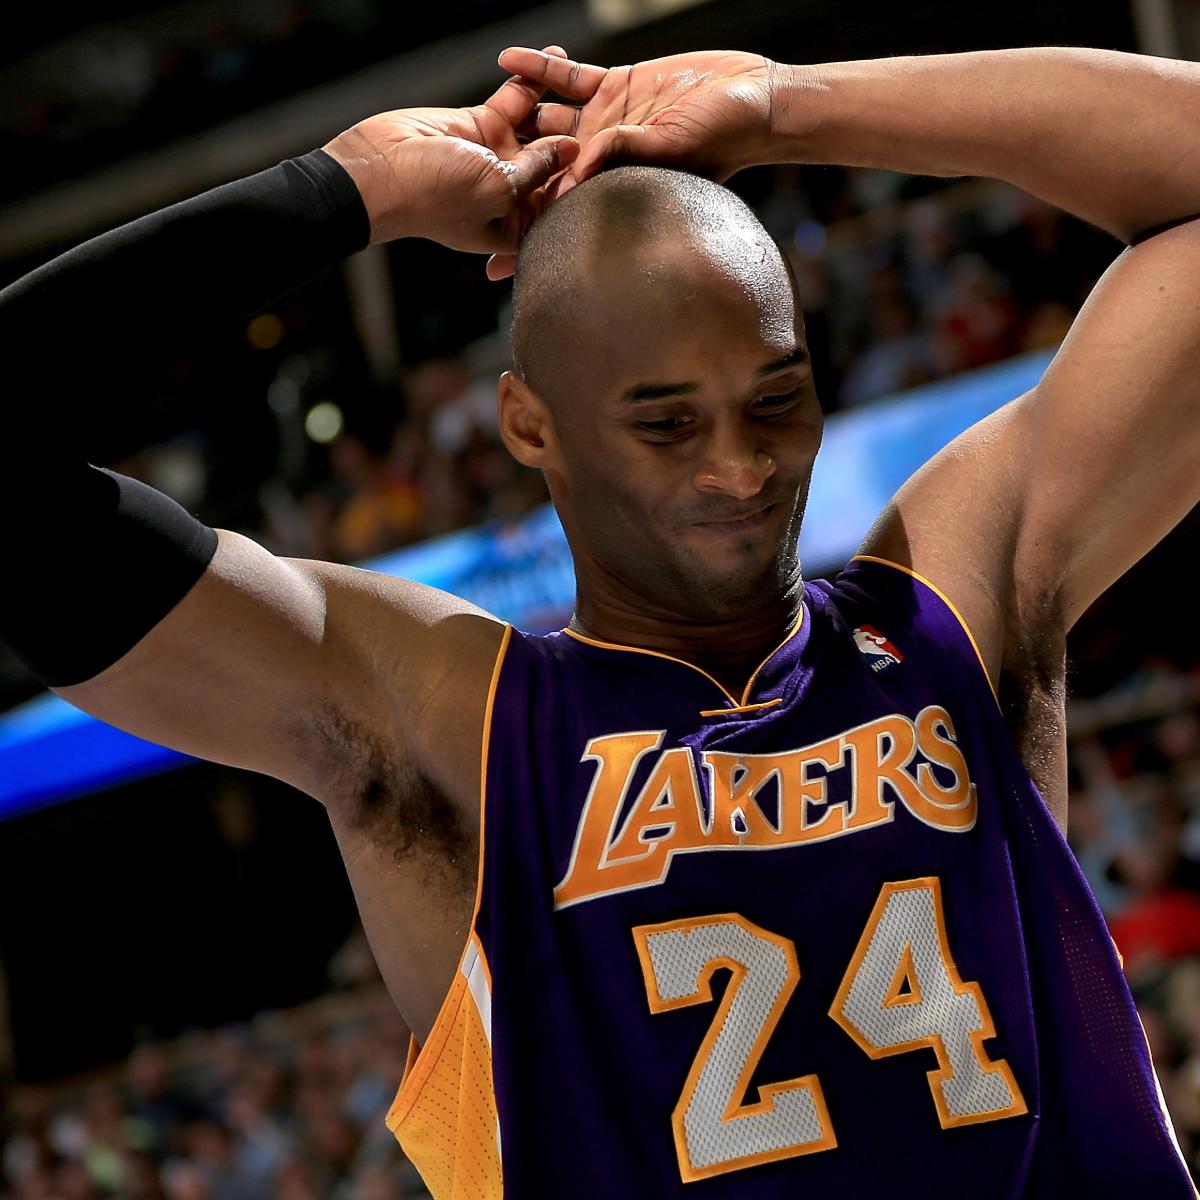 Is Kobe Bryant's Crack at L.A. Lakers' Age Really a Subtle Trade Suggestion ...1200 x 1200